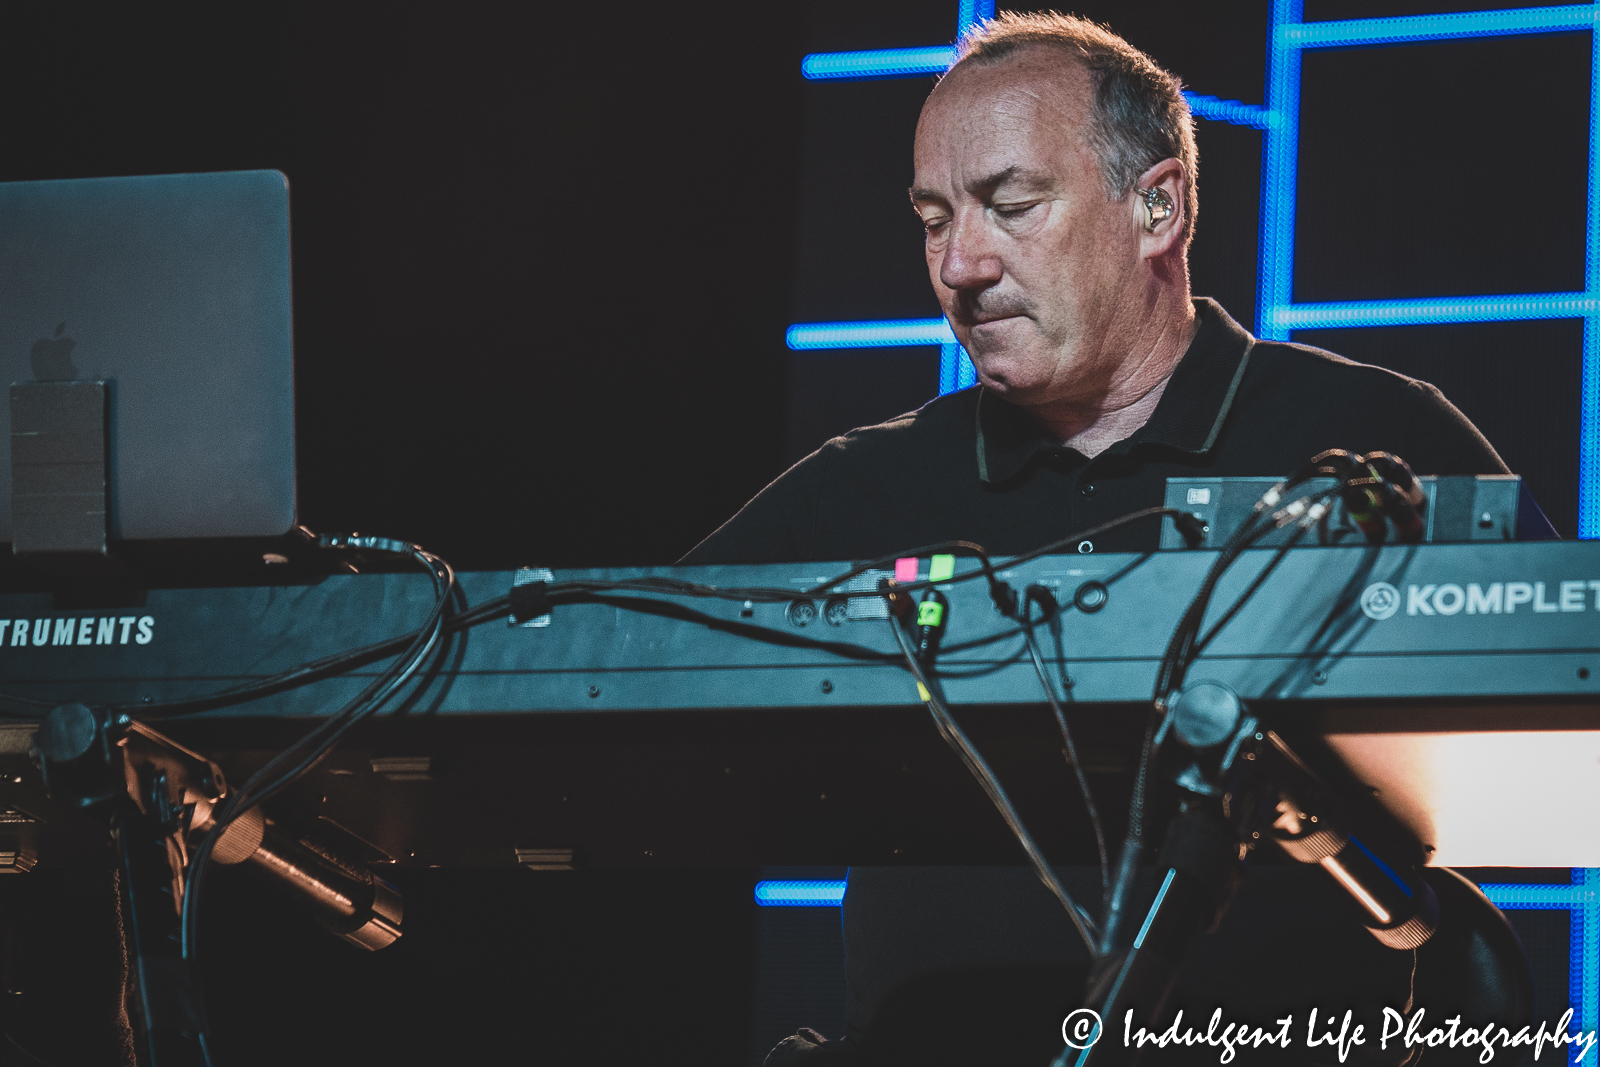 OMD keyboardist Martin Cooper live in concert at The Truman in Kansas City, MO on May 8, 2022.